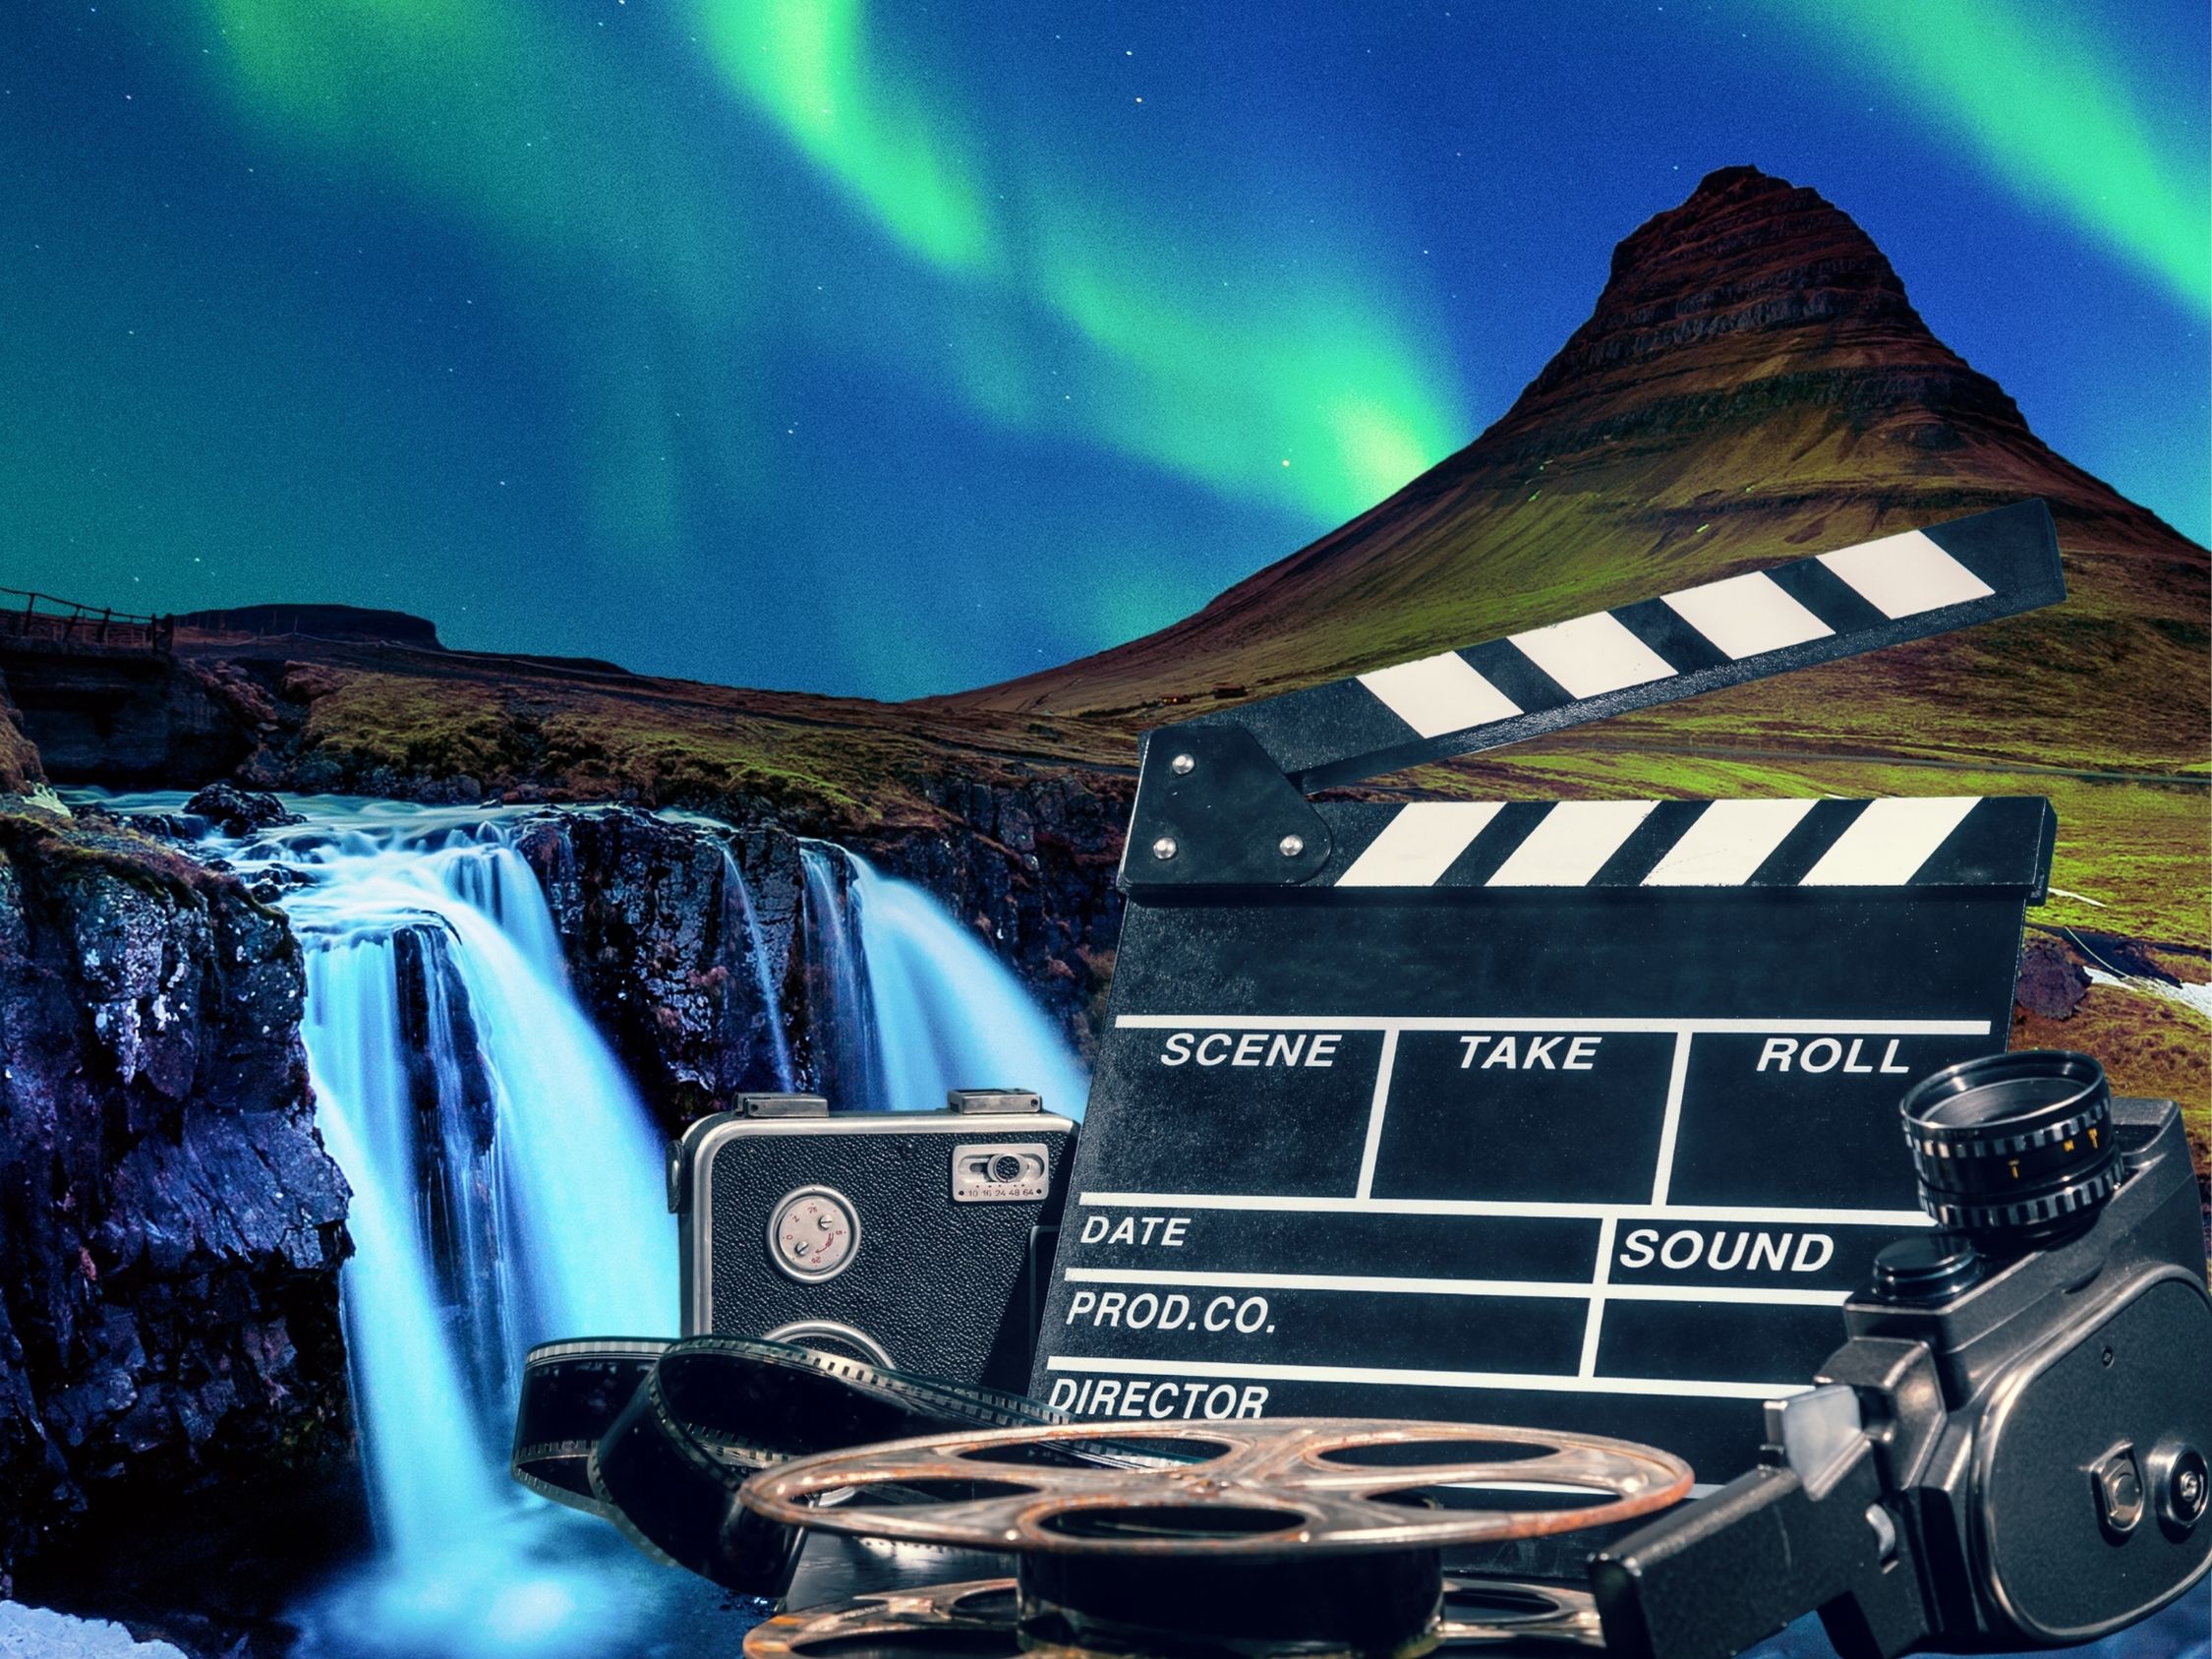 10 Extraordinary Movies Set In Iceland That Will Inspire You To Visit!